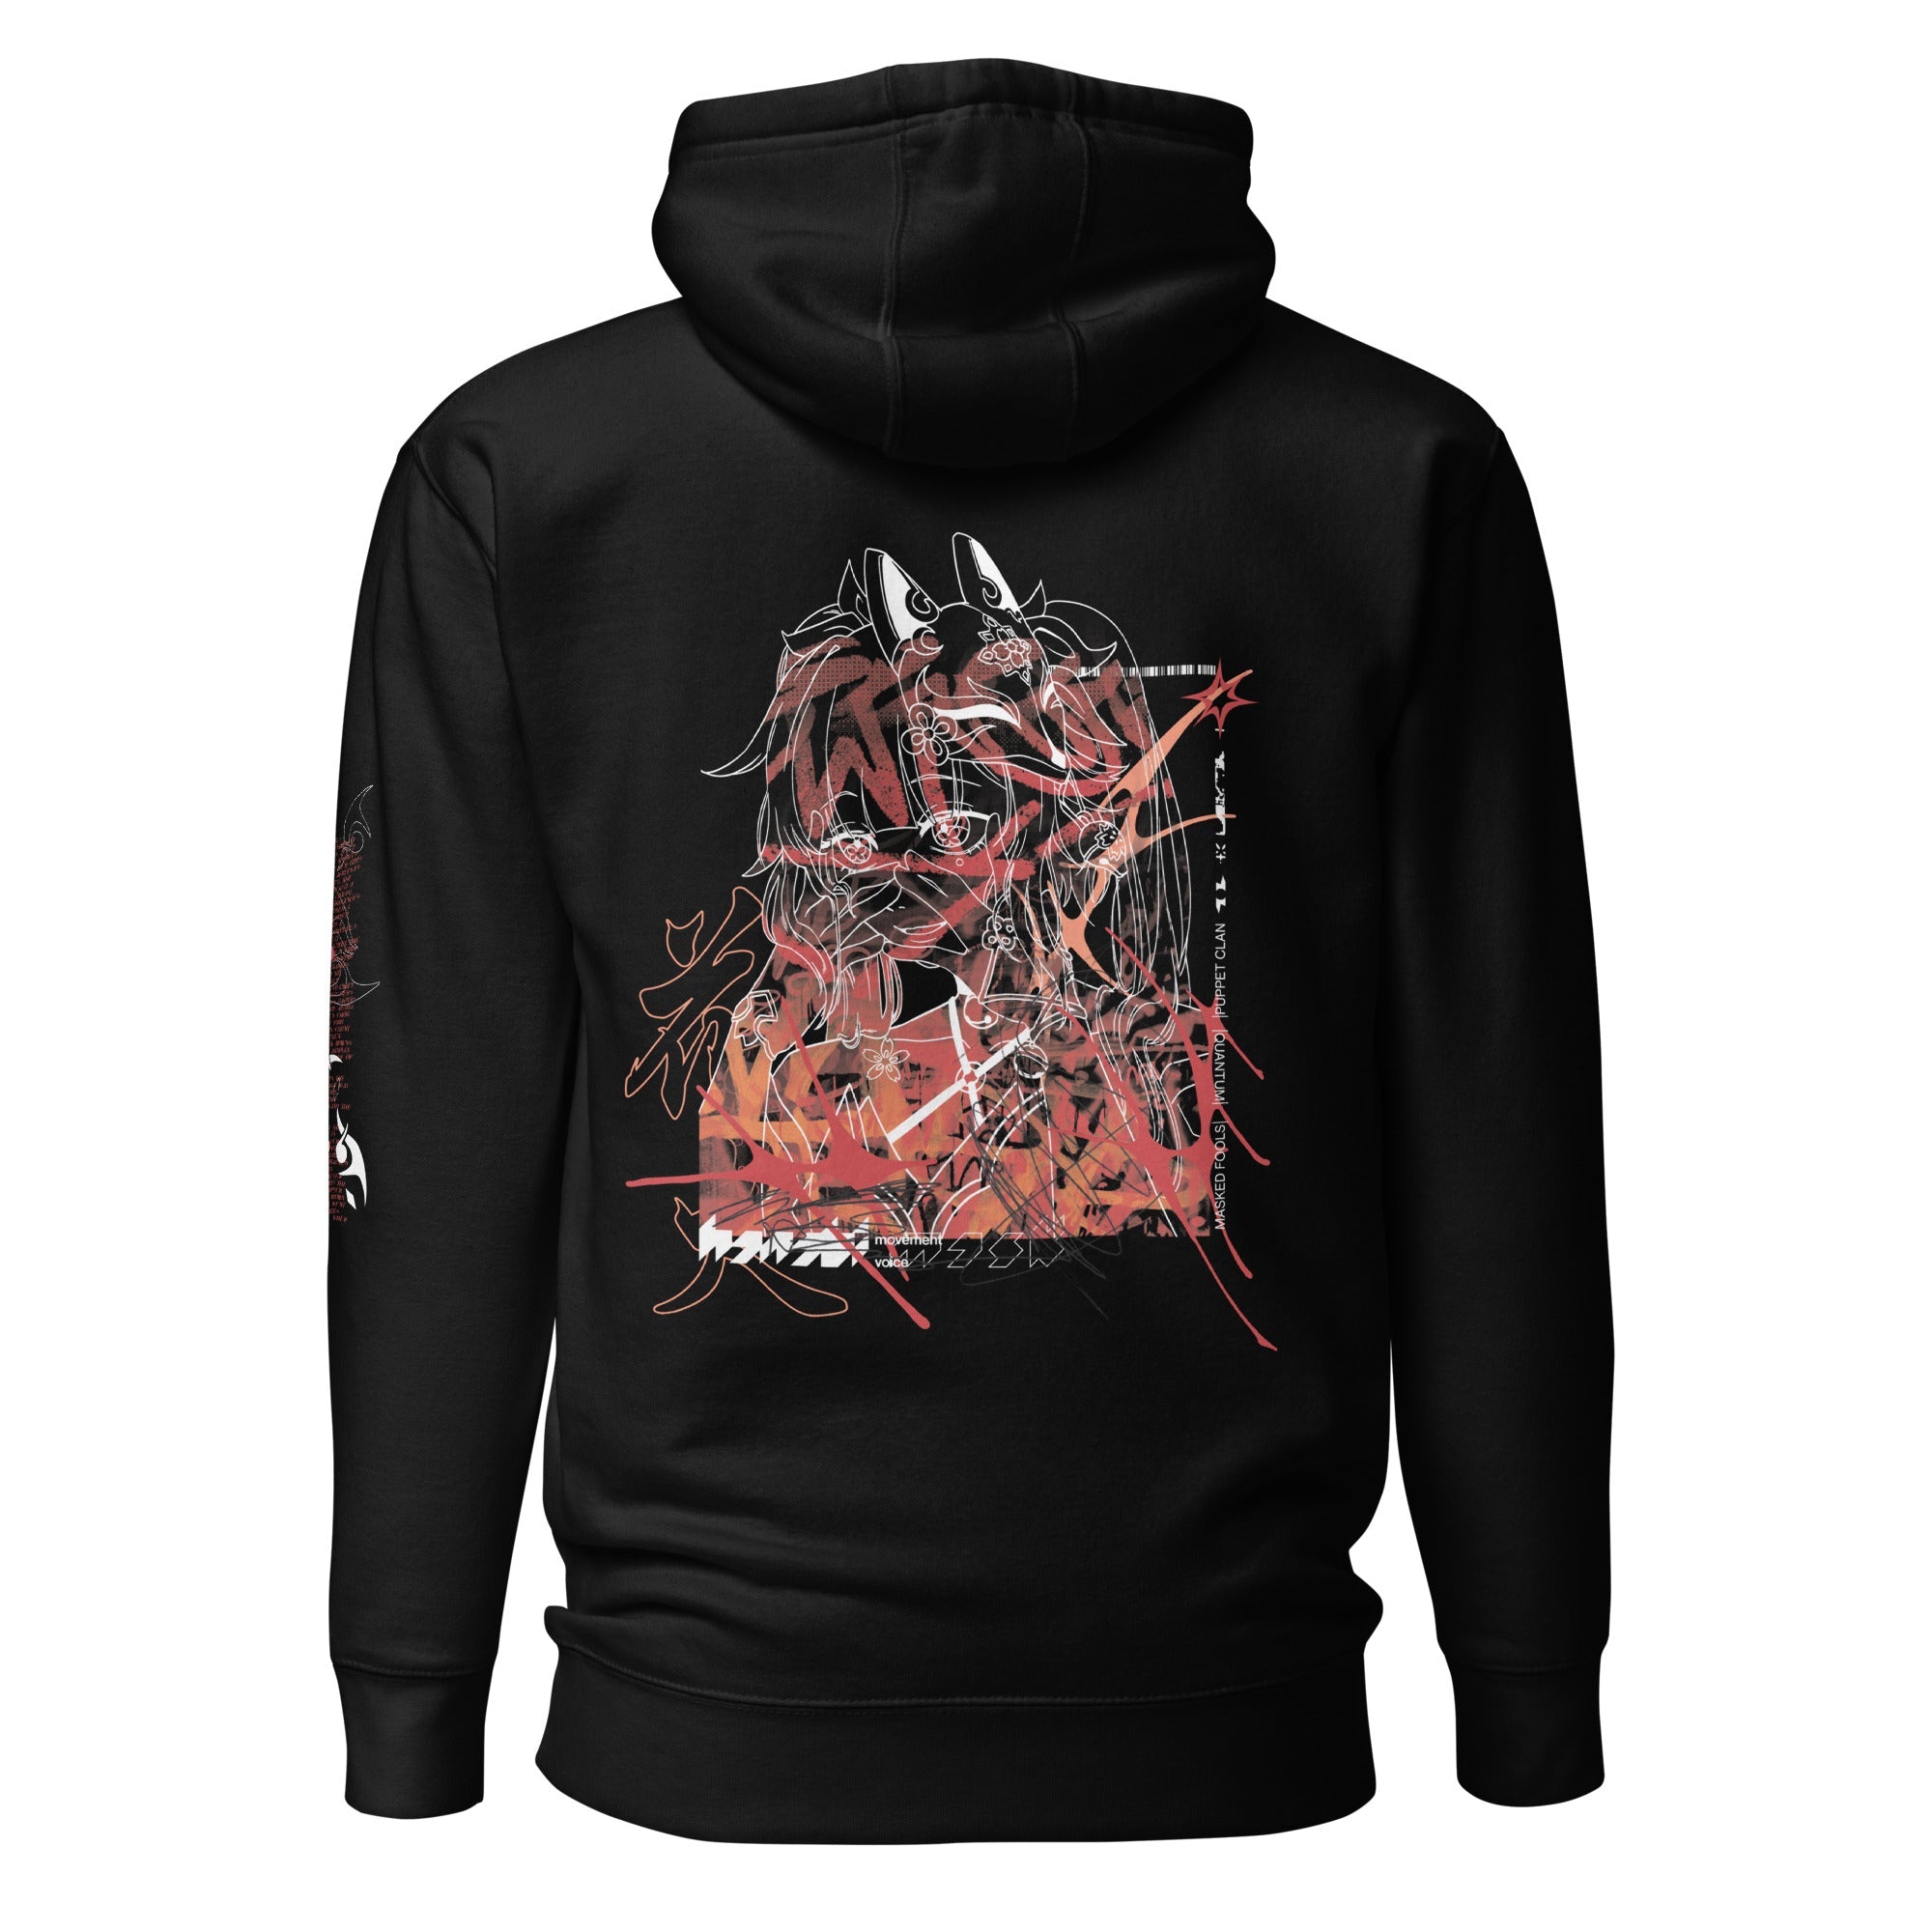 SHOWTIME • hoodie - Jackler - anime-inspired streetwear - anime clothing